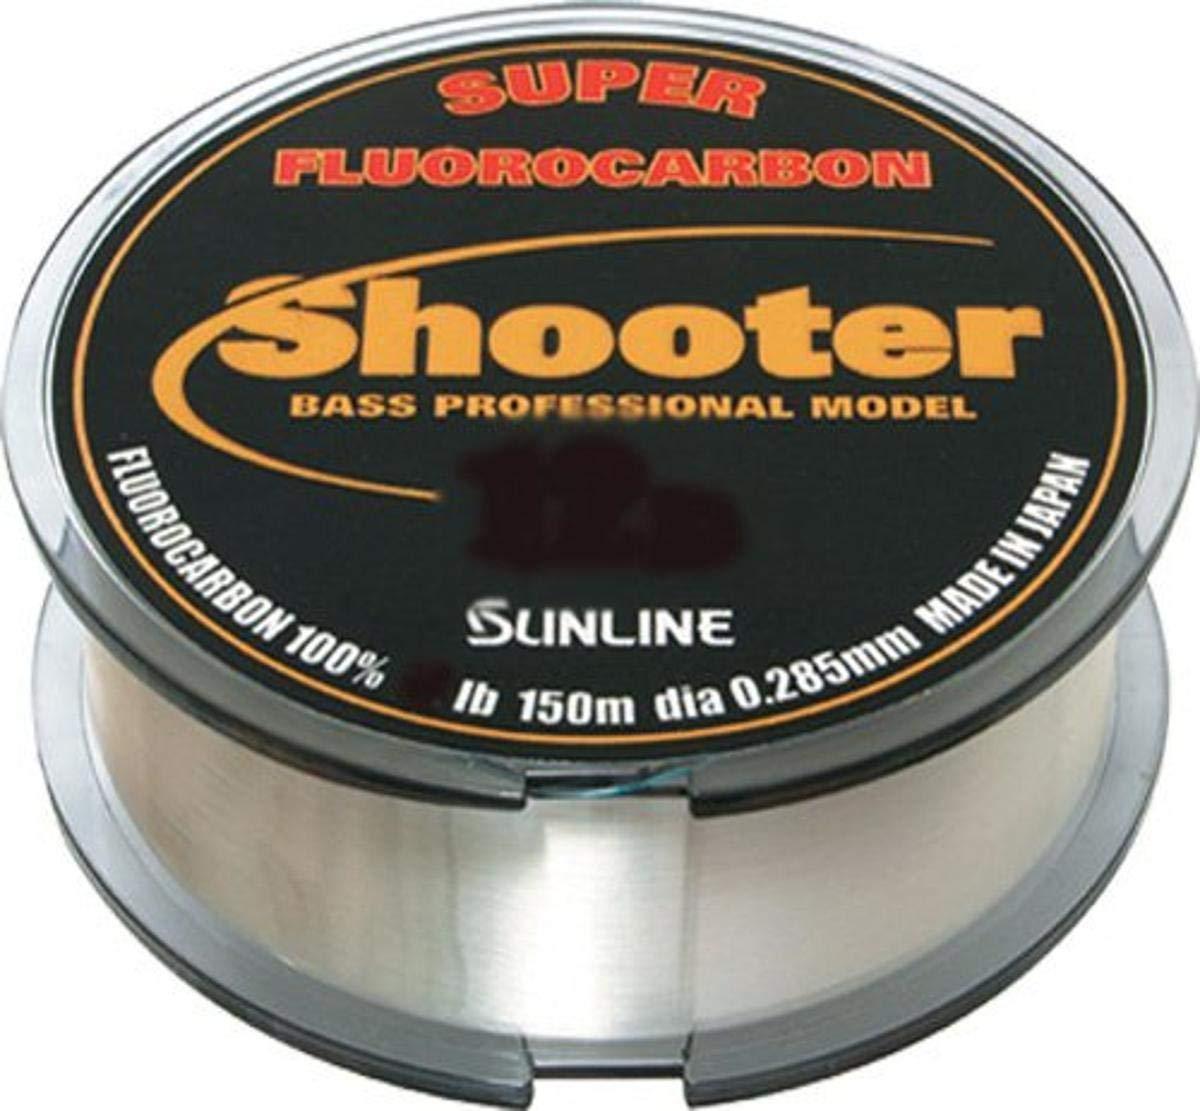 Sunline Fluorocarbon New Shooter Fishing Line 18-Pound Test/150m